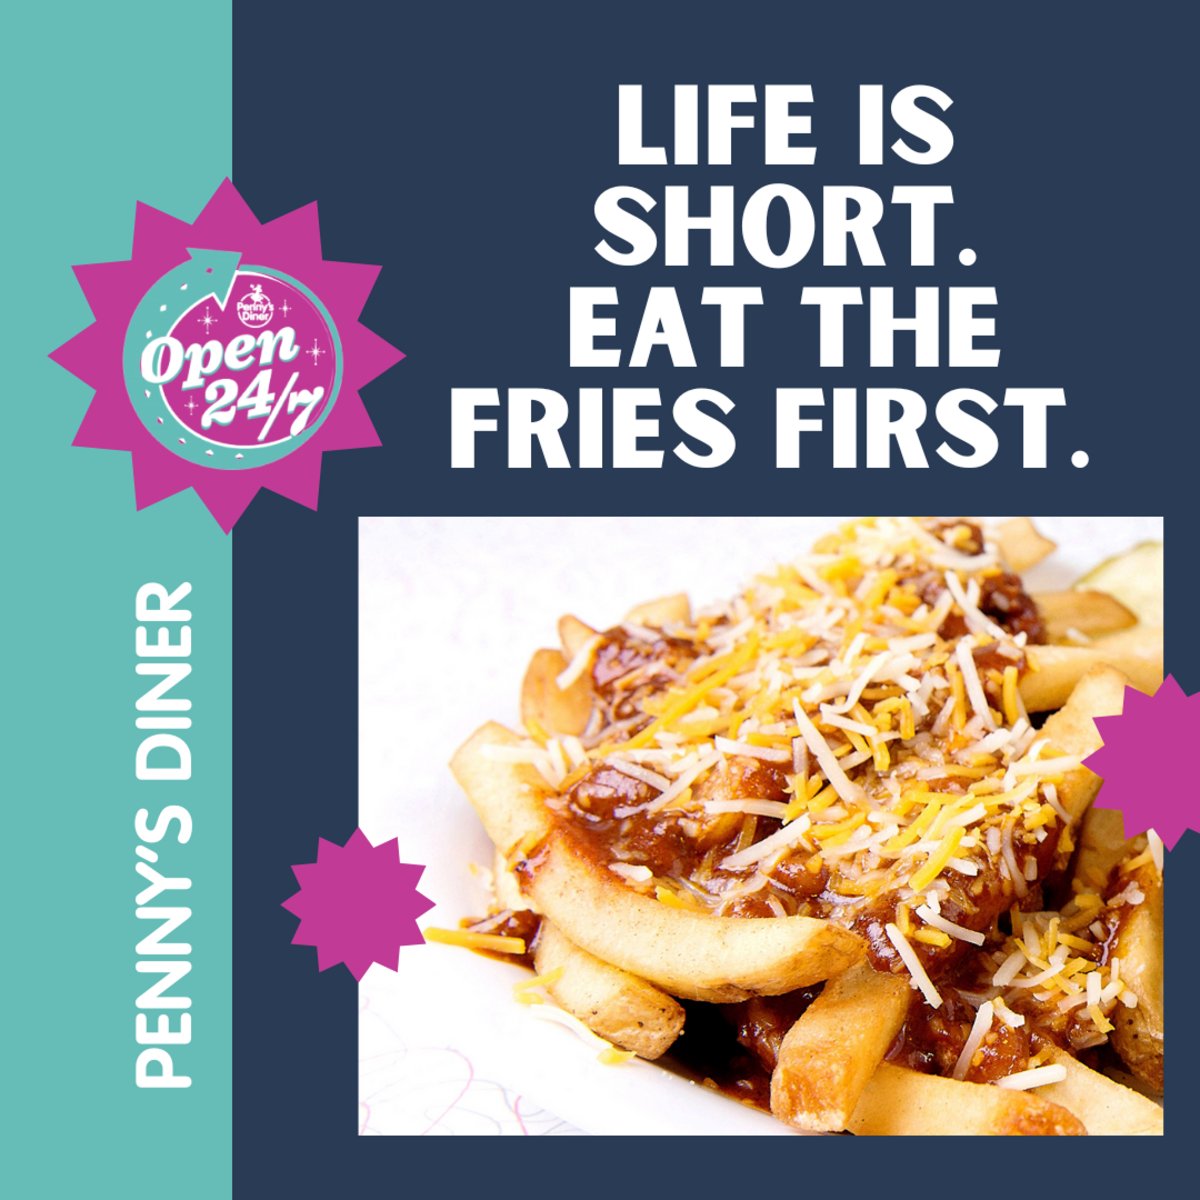 Like we always say at Penny's Diner North Platte, chili cheese the day! Stop by and kick off your feast with a basket of our legendary #chilicheesefries. Get 'em while they're hot!🔥🍟 #PennysDiner